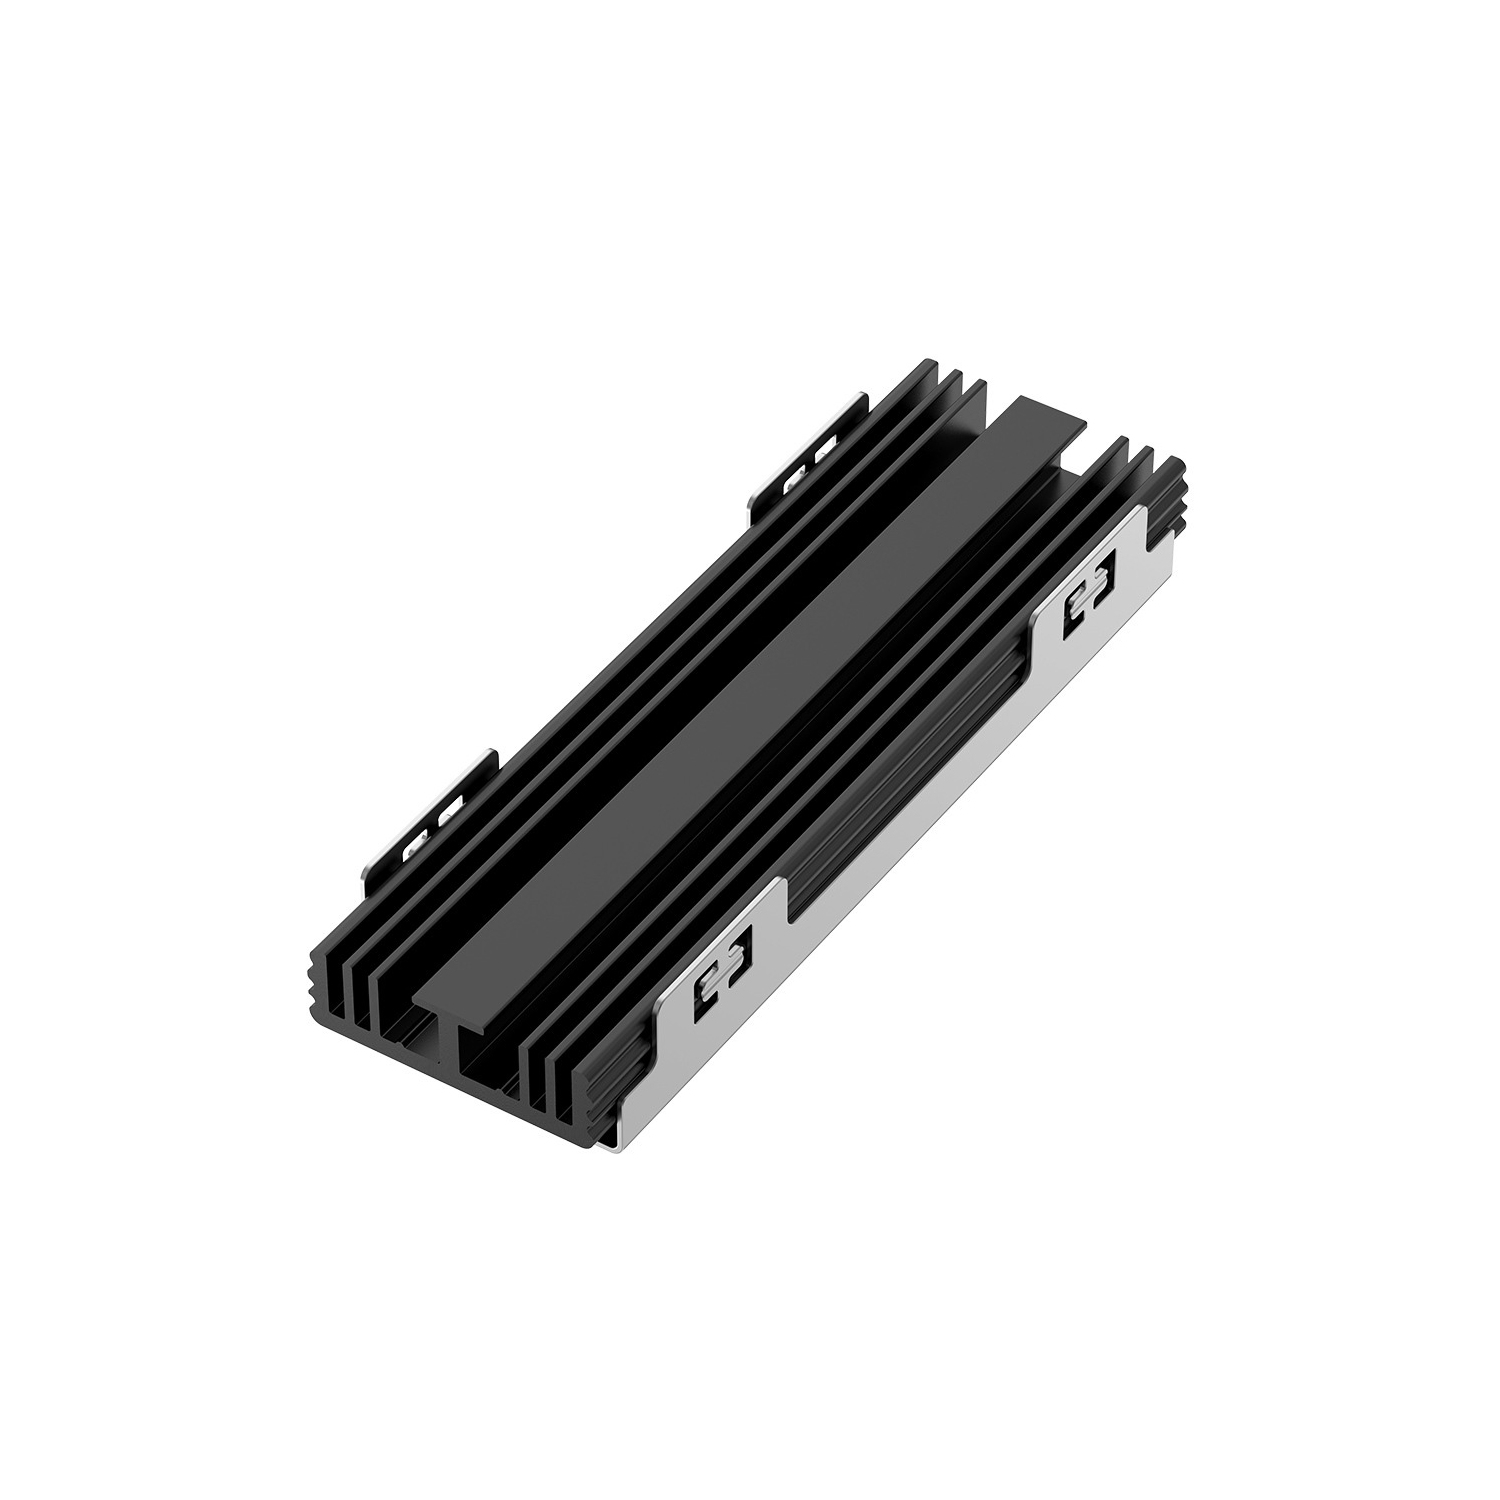 M.2 2280 SSD Heatsink with Double Thermal Silicone Pad for PCIE NVME Aluminum Alloy Material - axGear